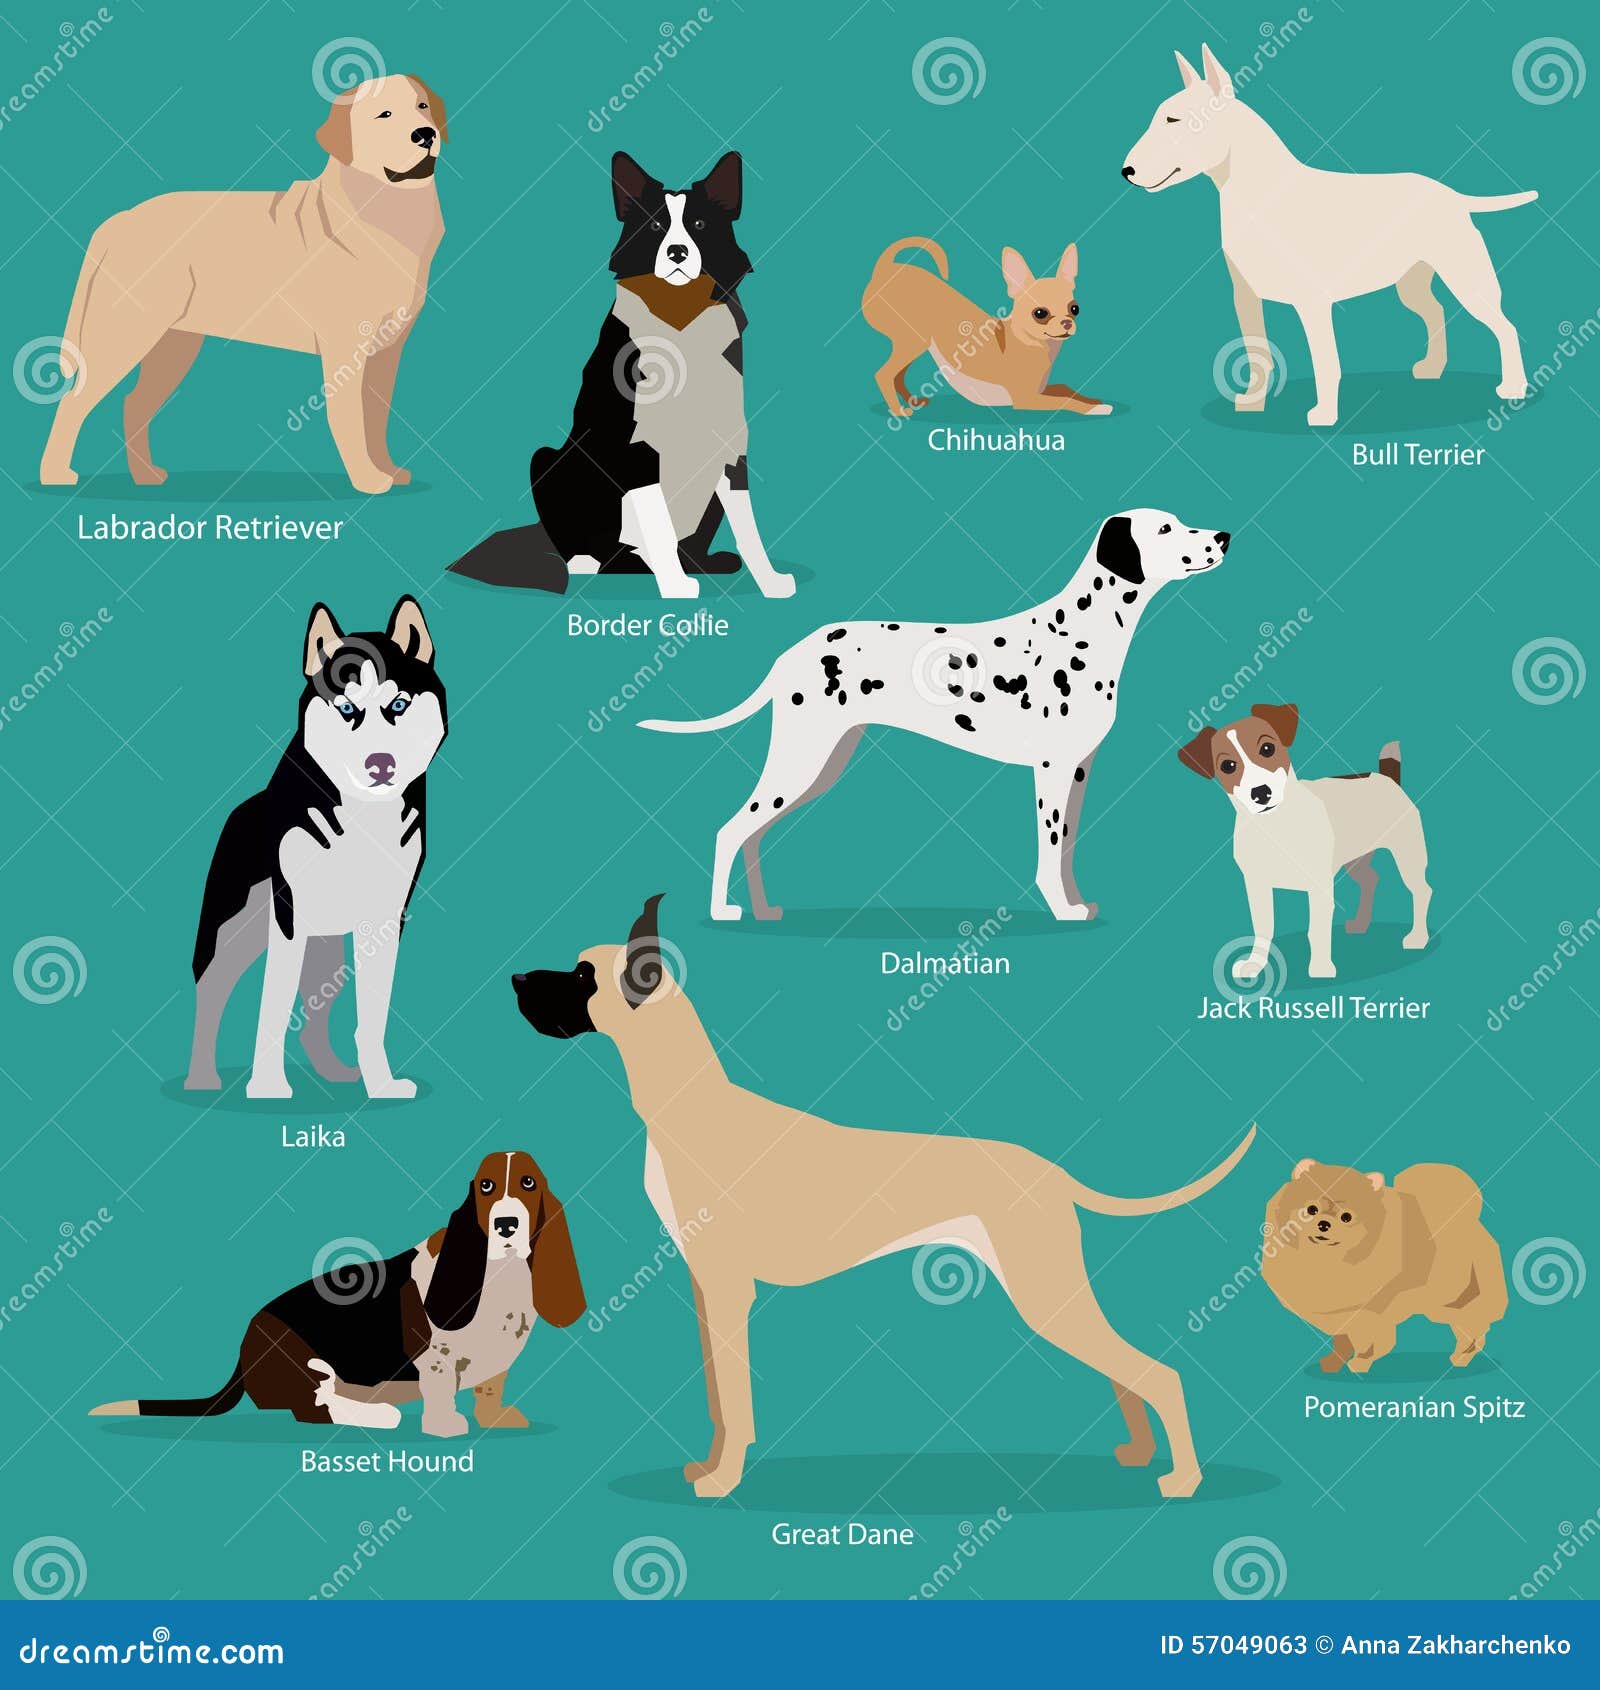 Cartoon Dogs For Coloring Book Or Page Vector Illustration ...